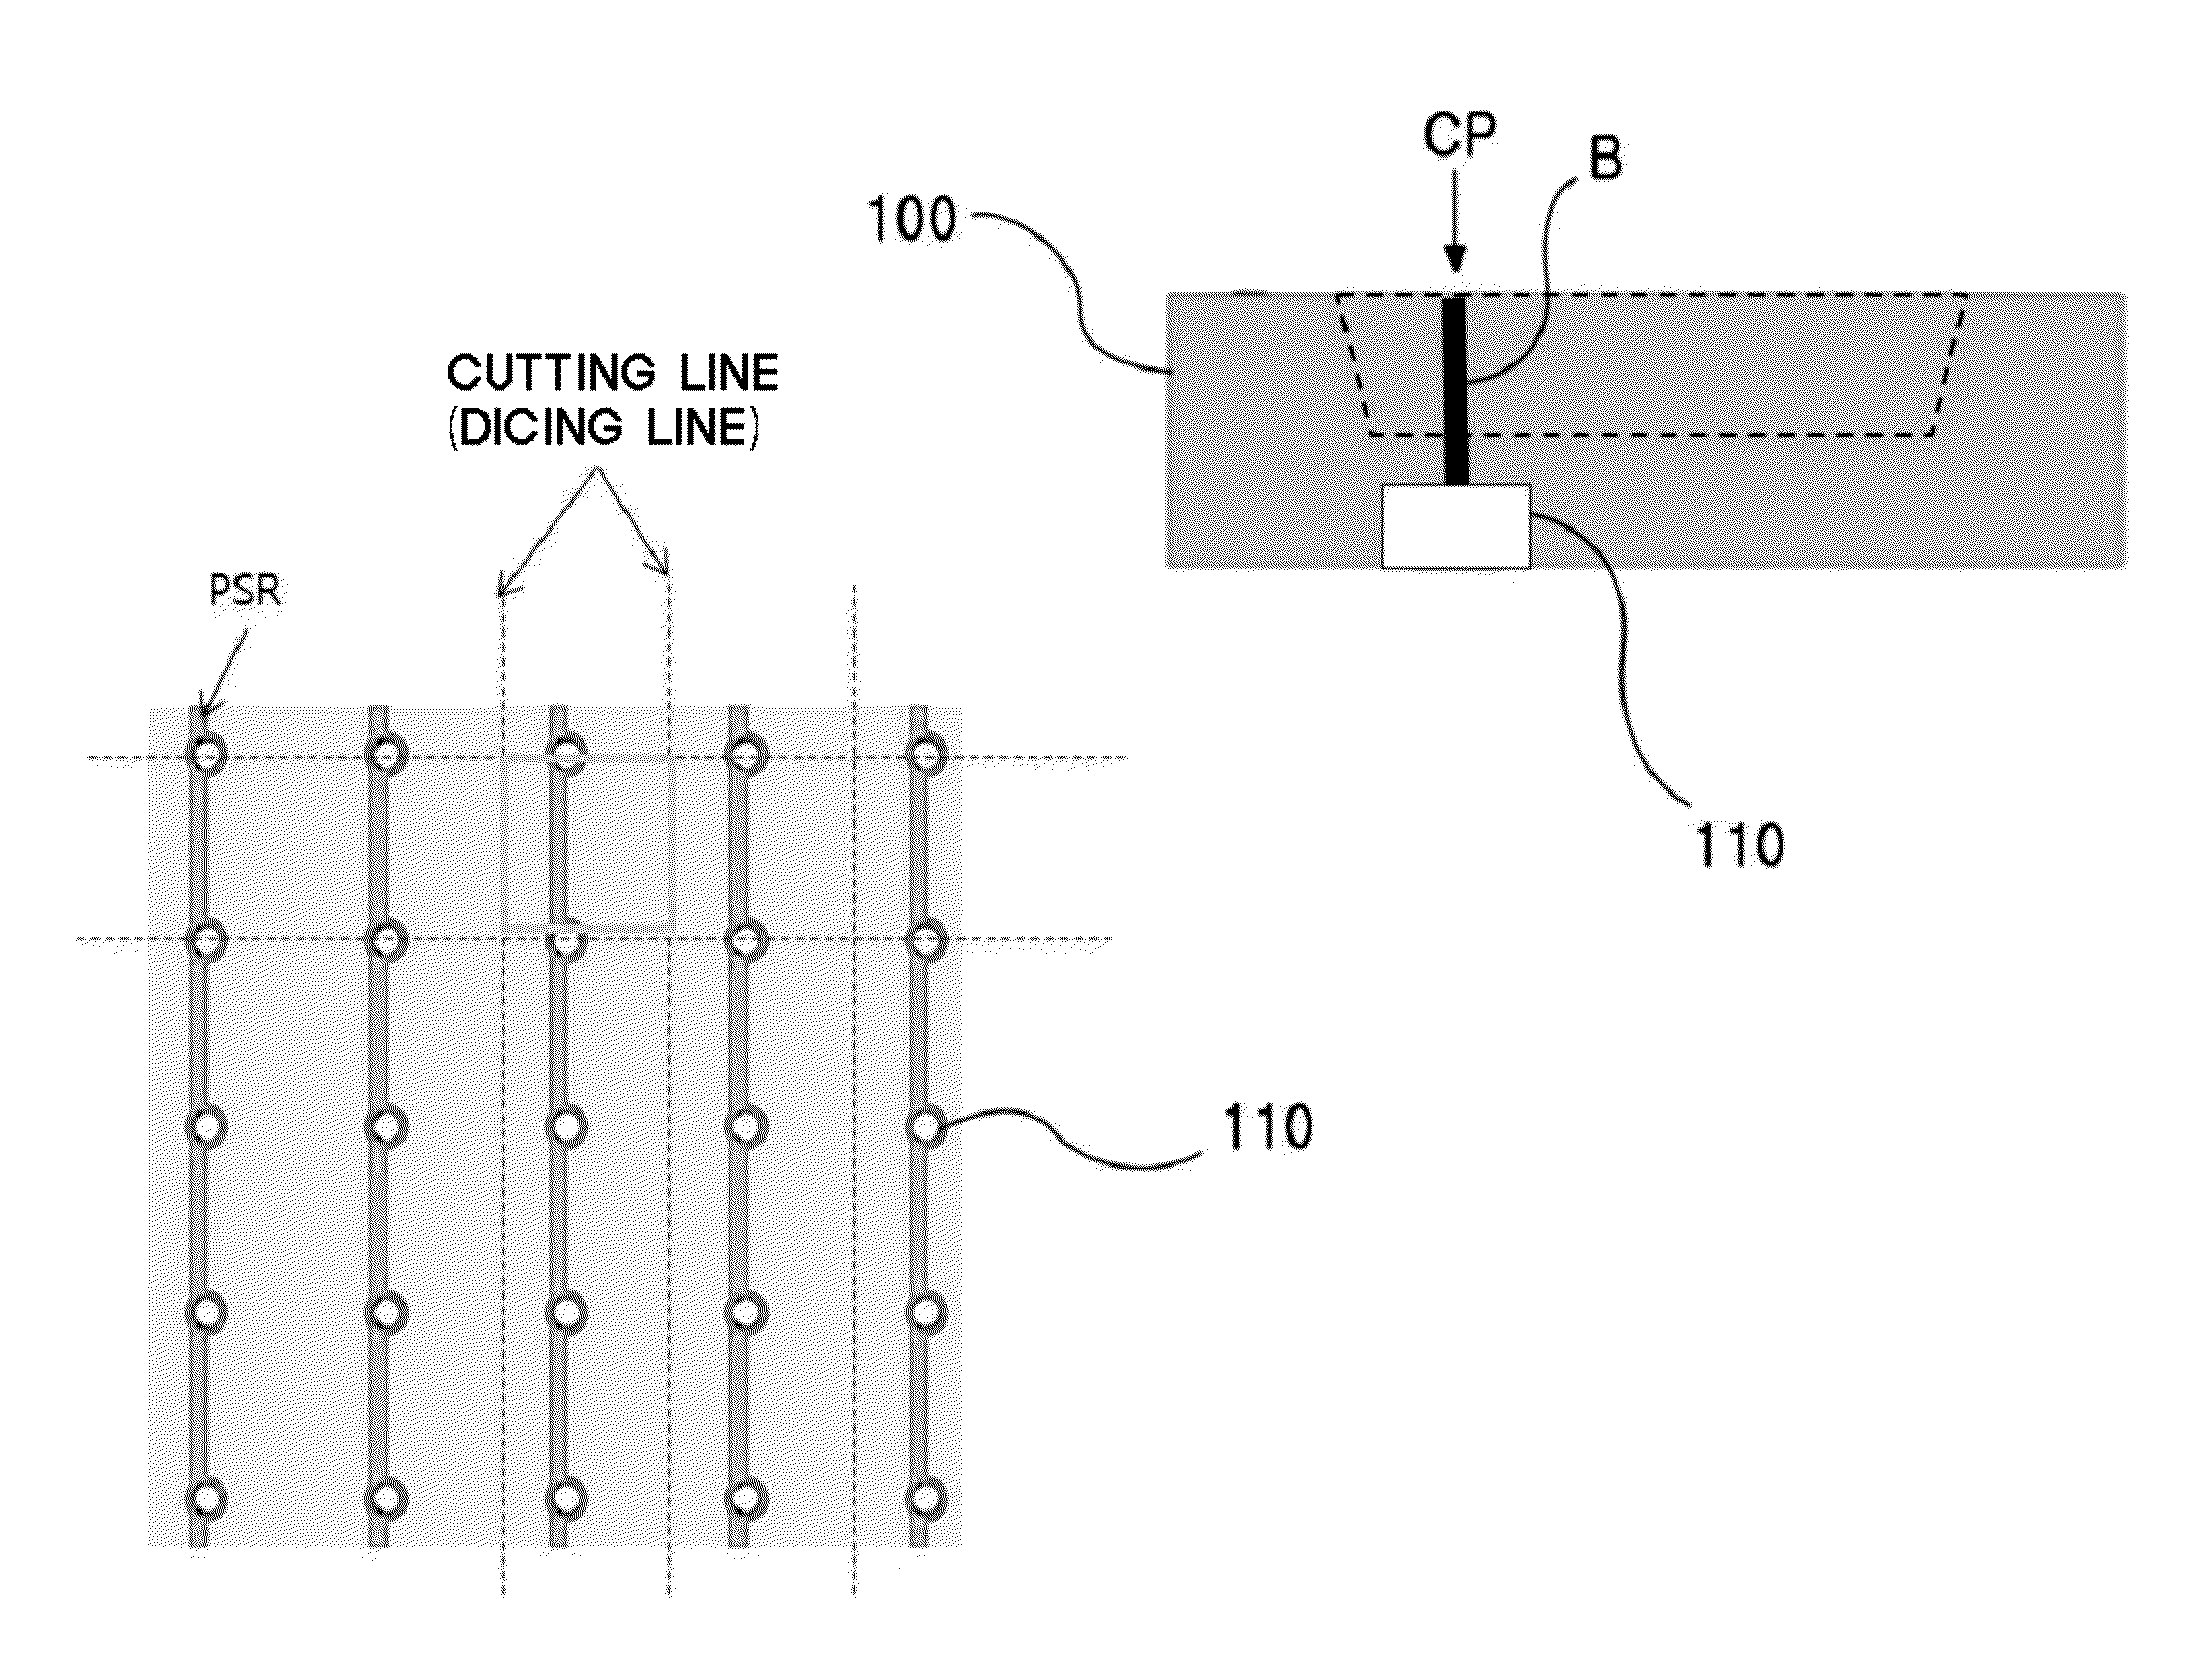 Substrate for preventing burr generation